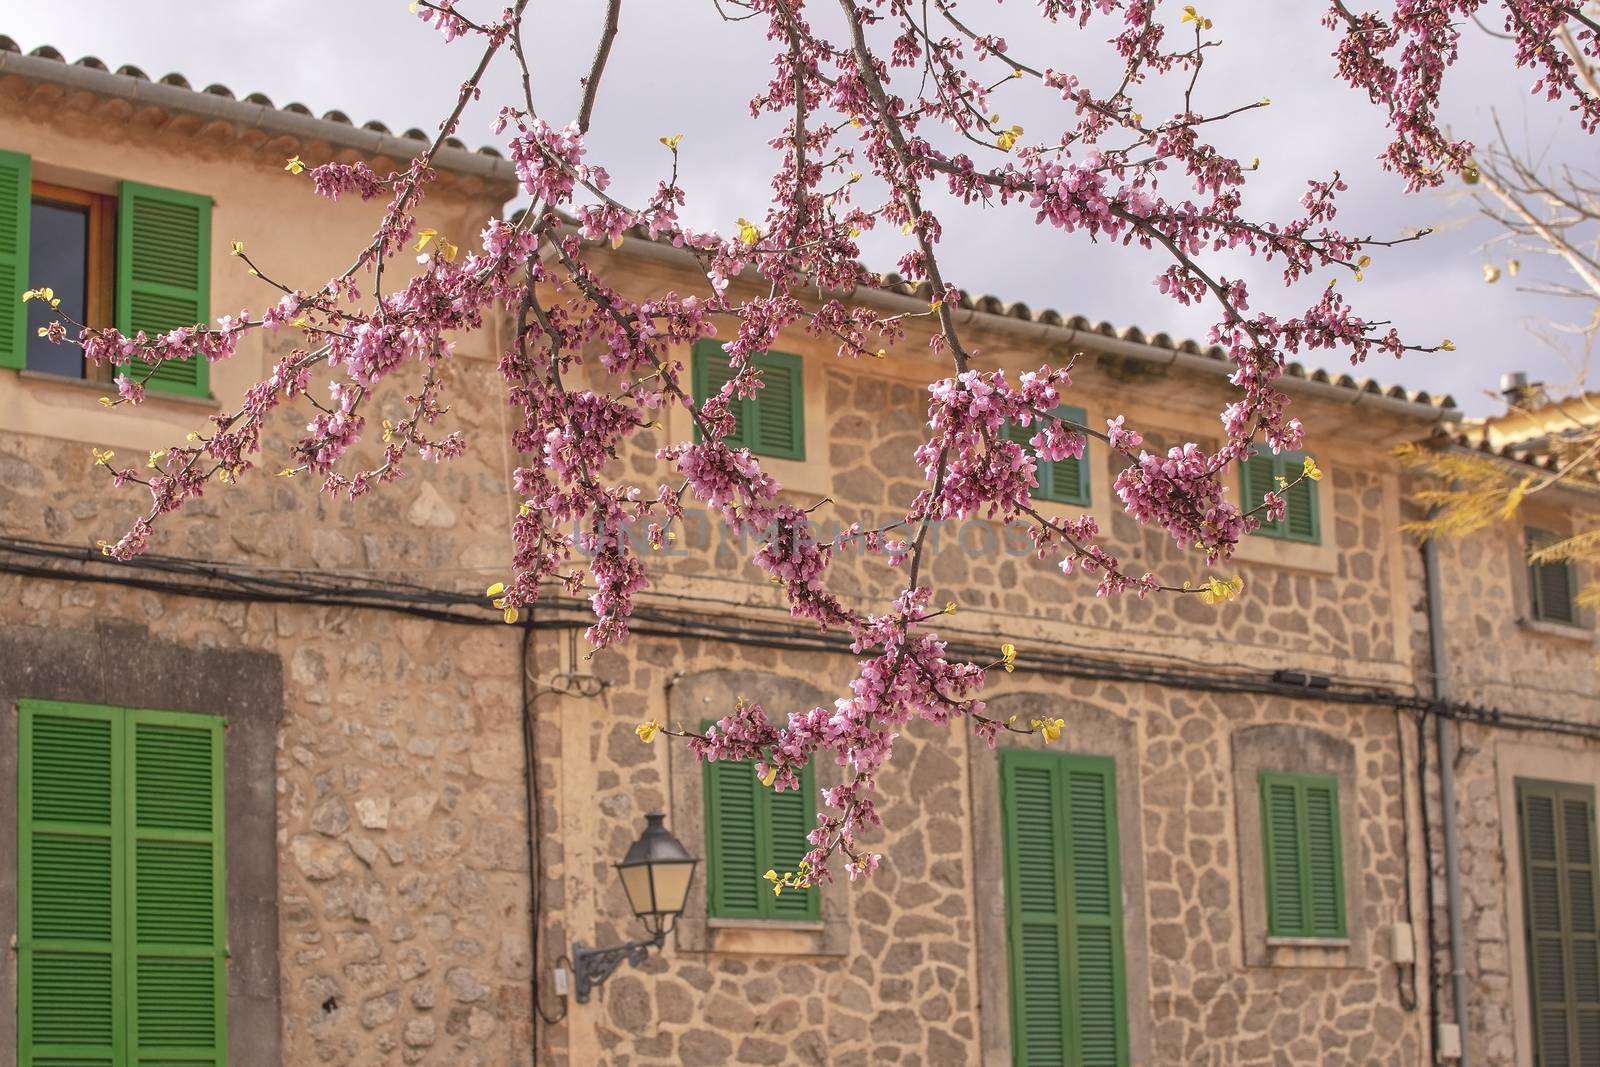 Beautiful blossoming tree in pink against old traditional stone house with green window shutters in Valldemossa, Majorca, Spain.